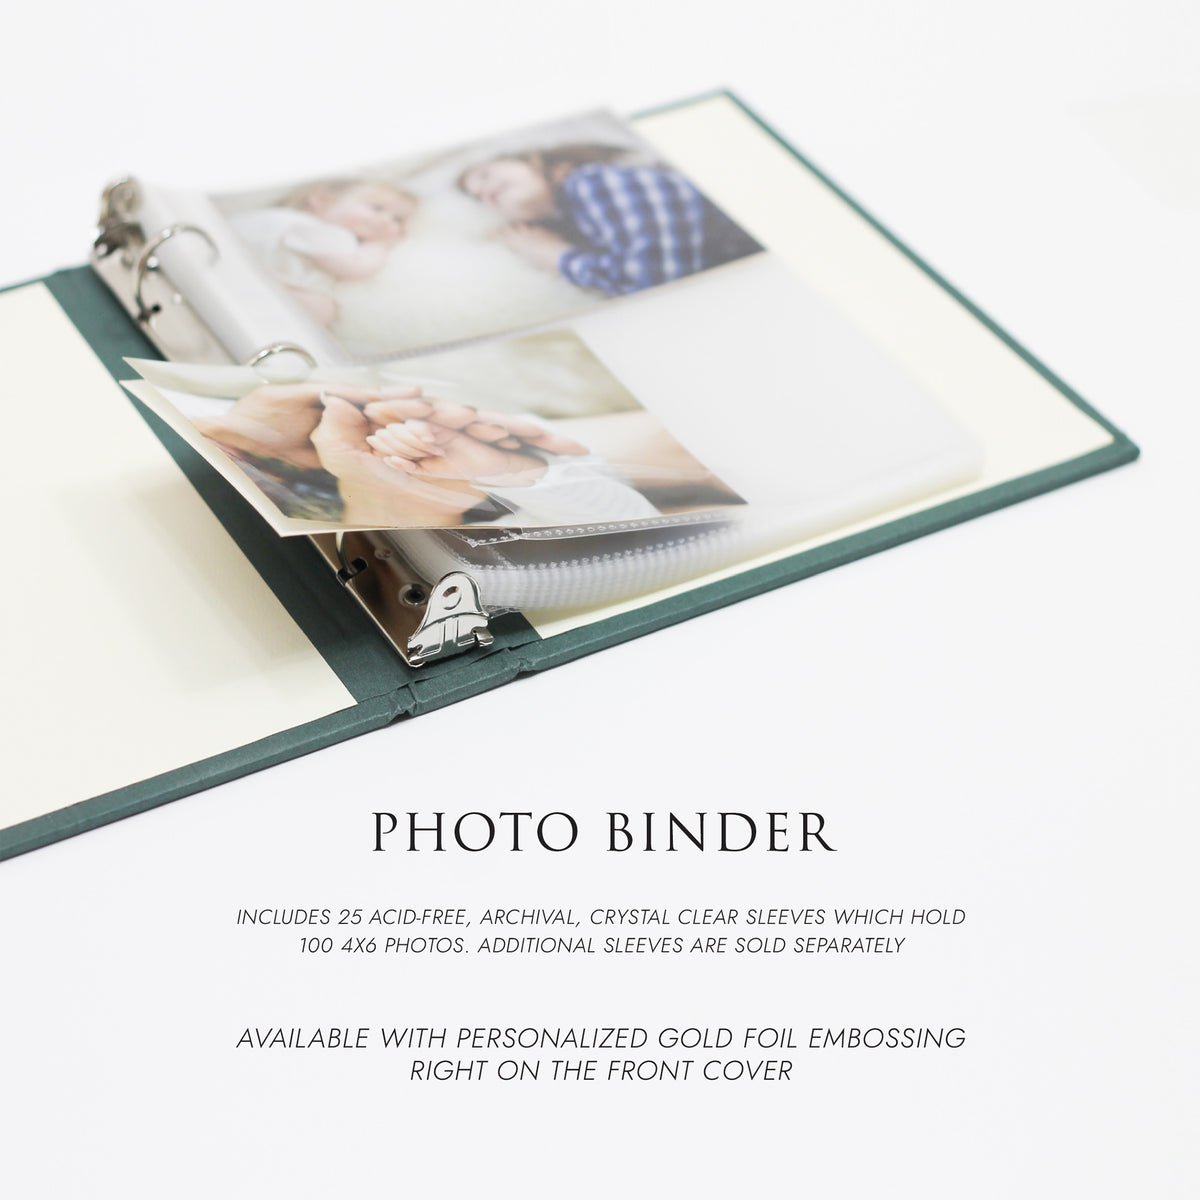 Medium Photo Binder | for 4 x 6 photos | with Powder Blue Cotton Cover